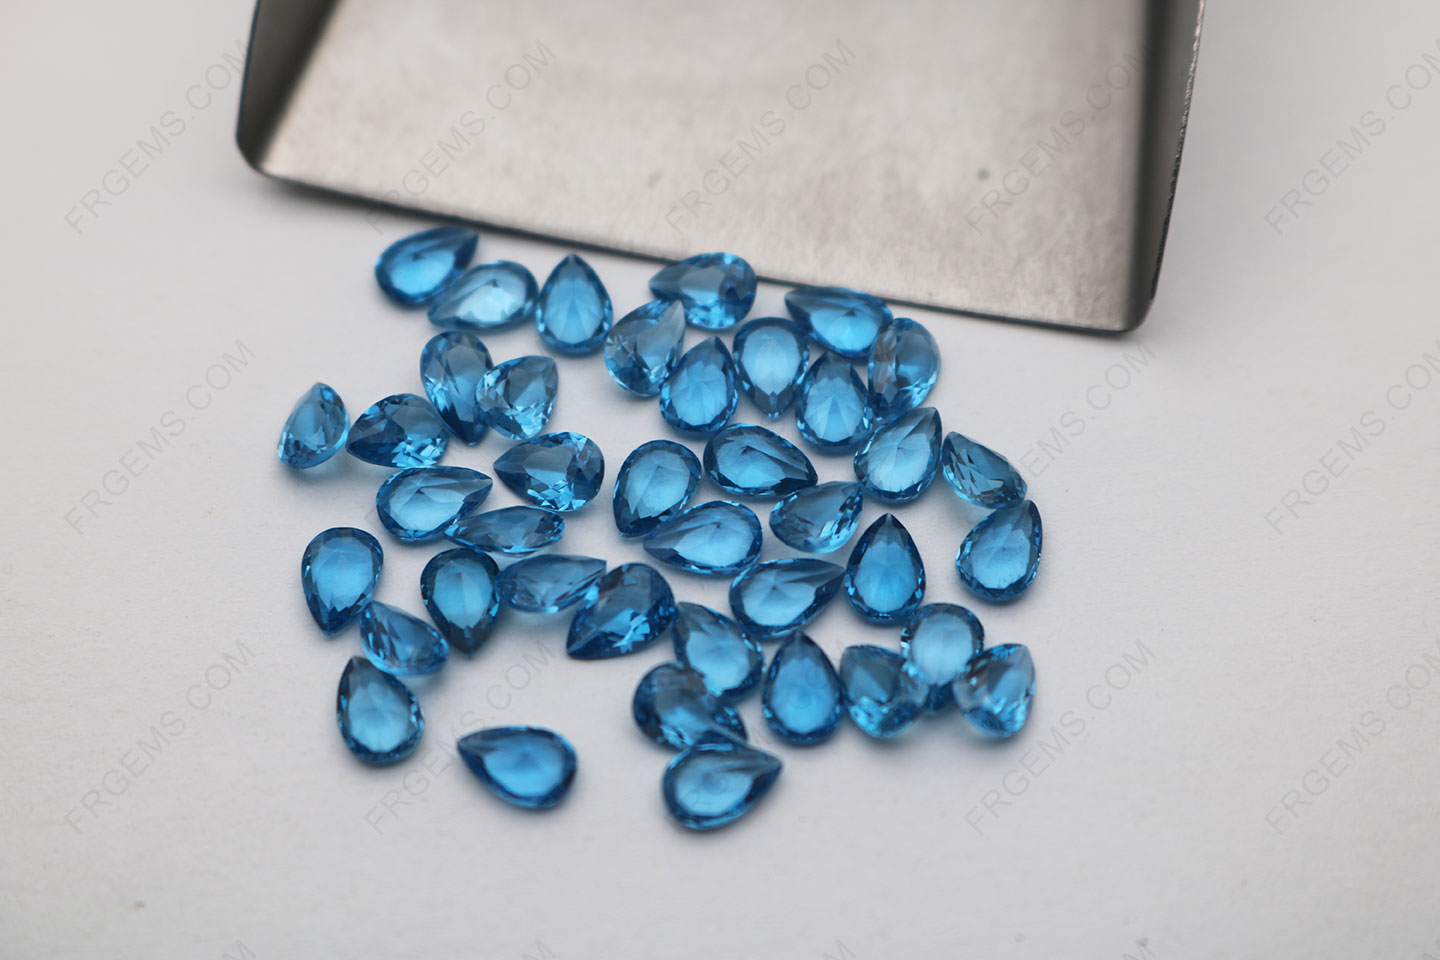 Loose Spinel Swiss blue 119# Color Pear shape Faceted cut 6x4mm gemstones Wholesale at factory price